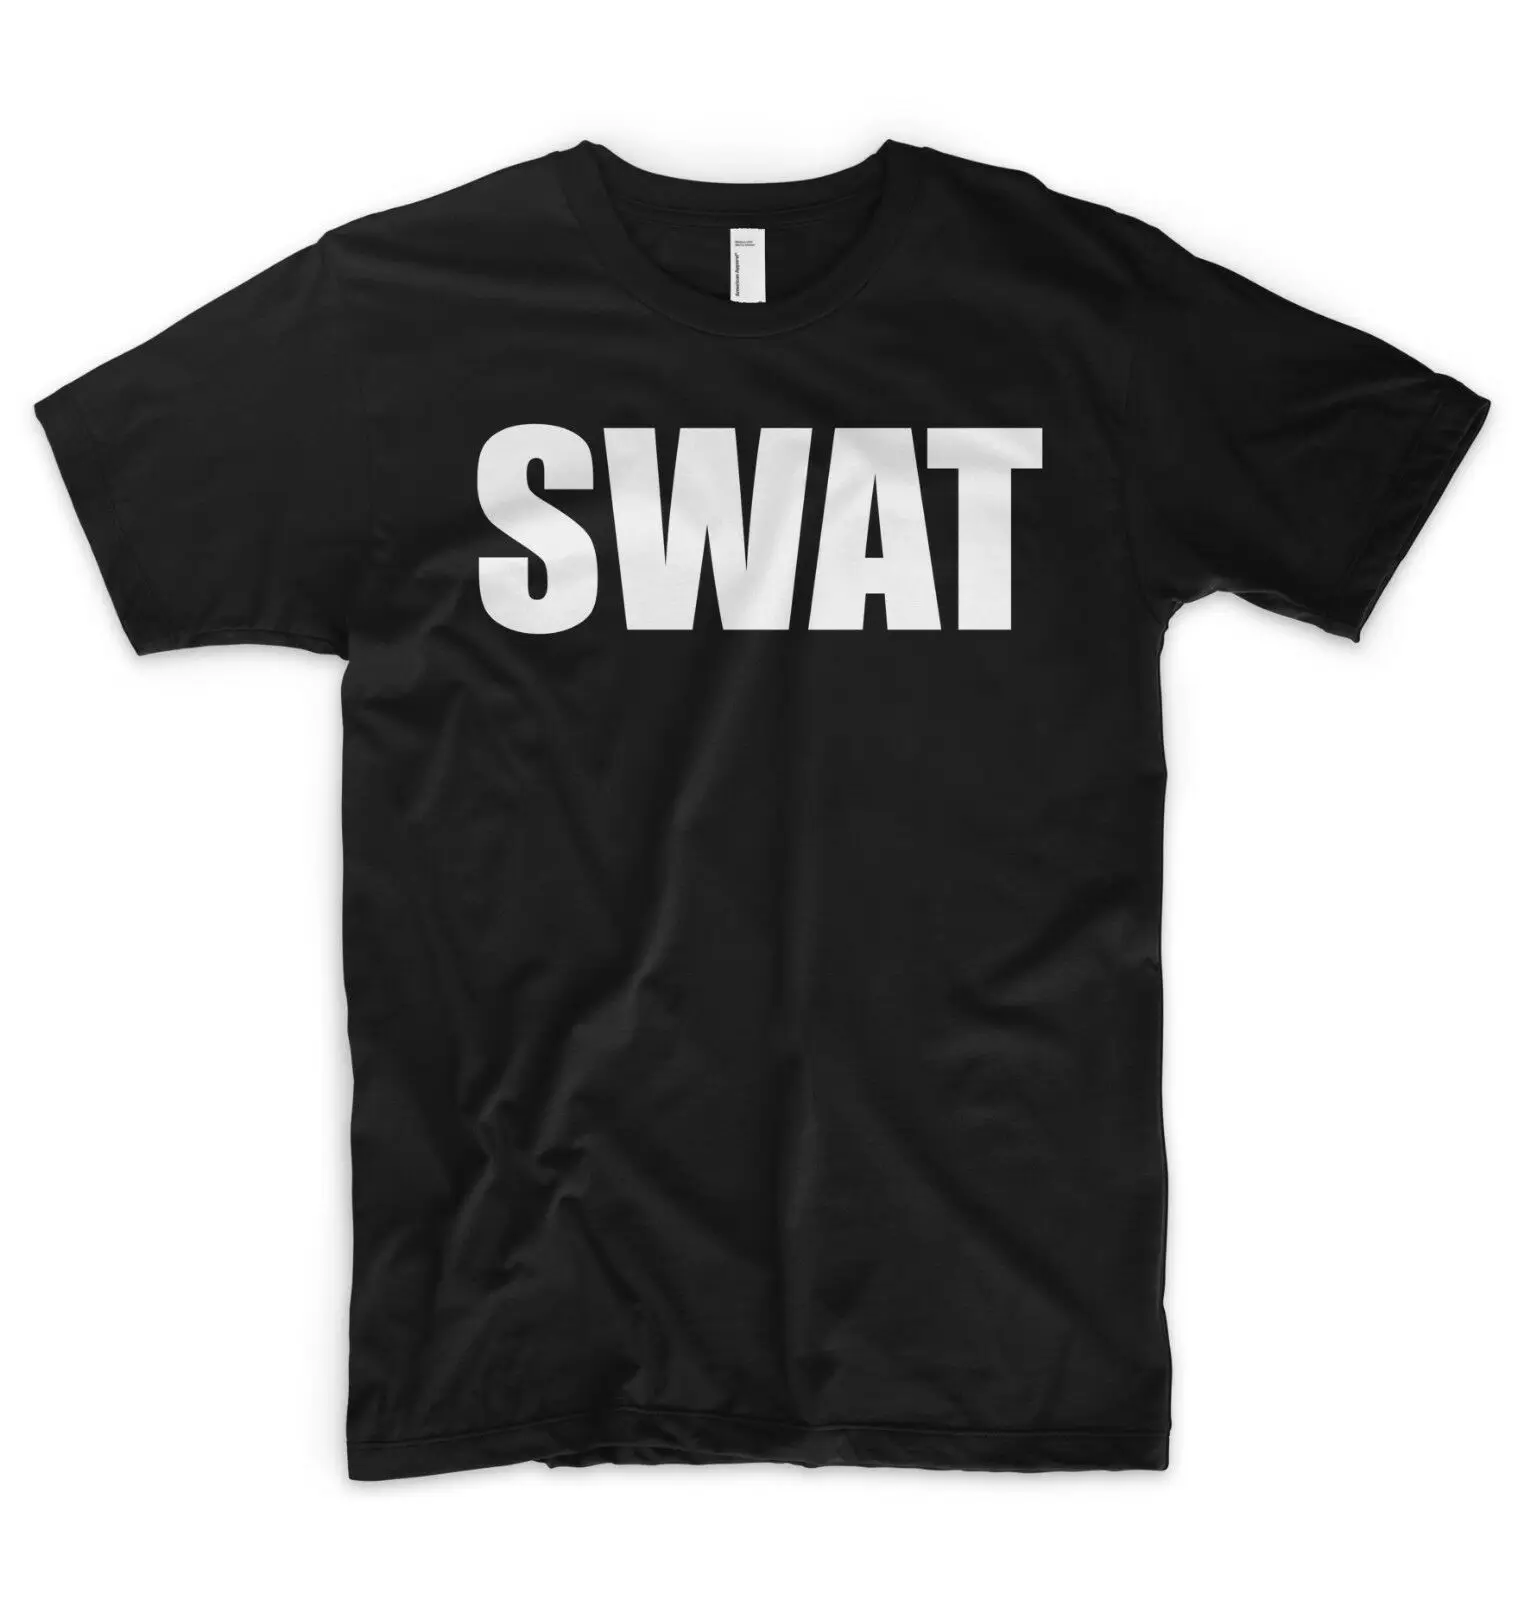 

Special Forces FBI Police SWAT Simple Text Printed T Shirt. Short Sleeve 100% Cotton Casual T-shirts Loose Top Size S-3XL